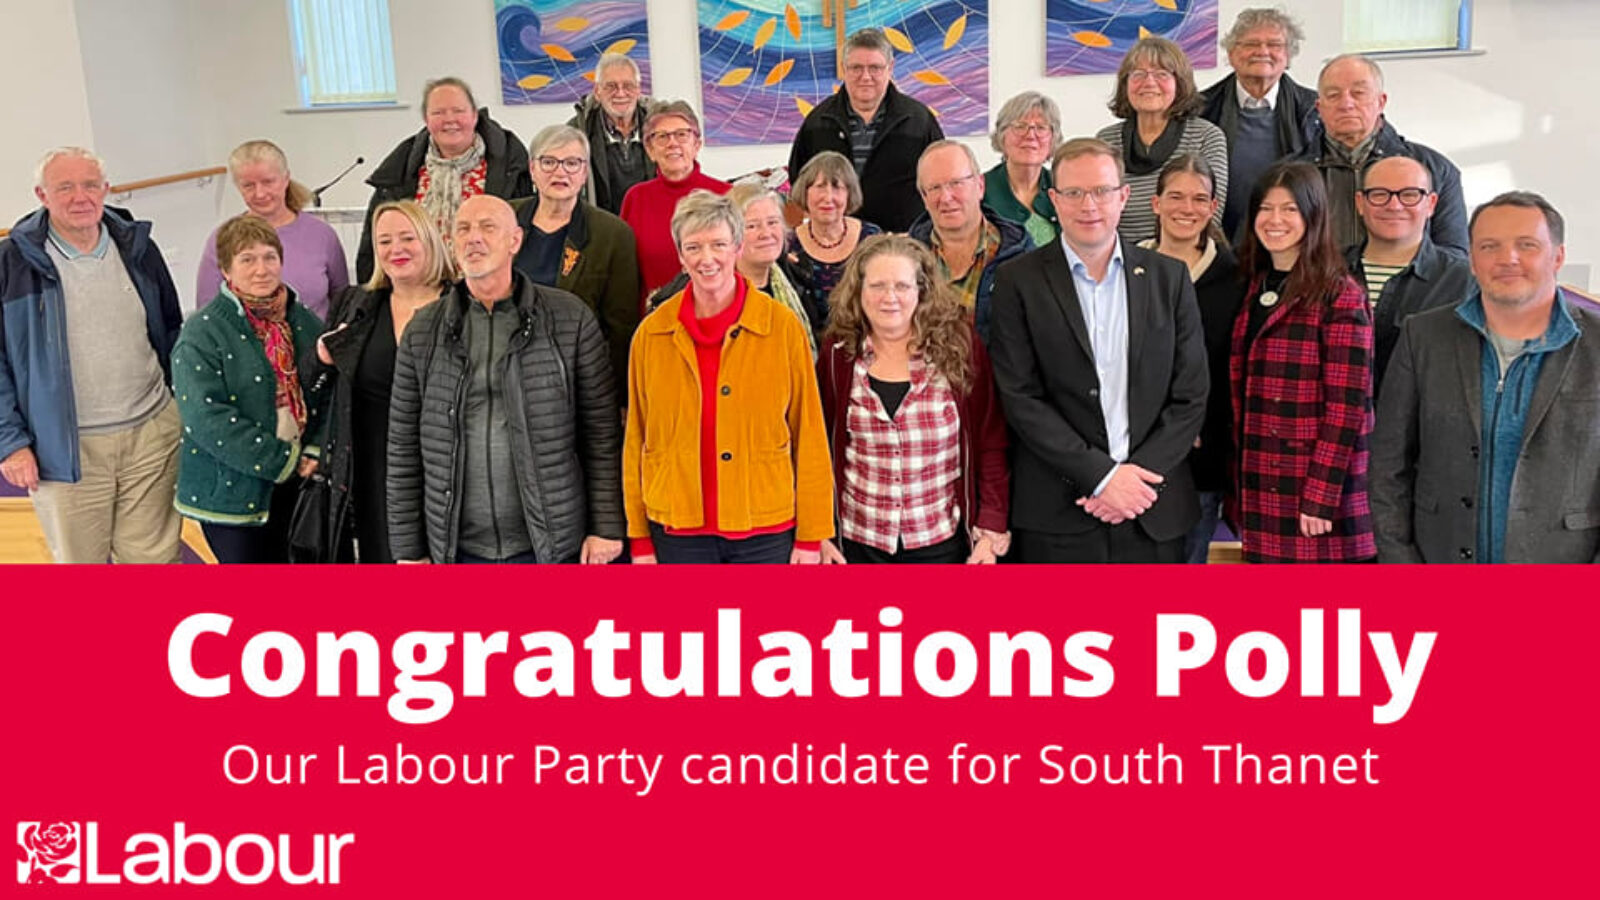 A picture of Polly with members of the South Thanet CLP